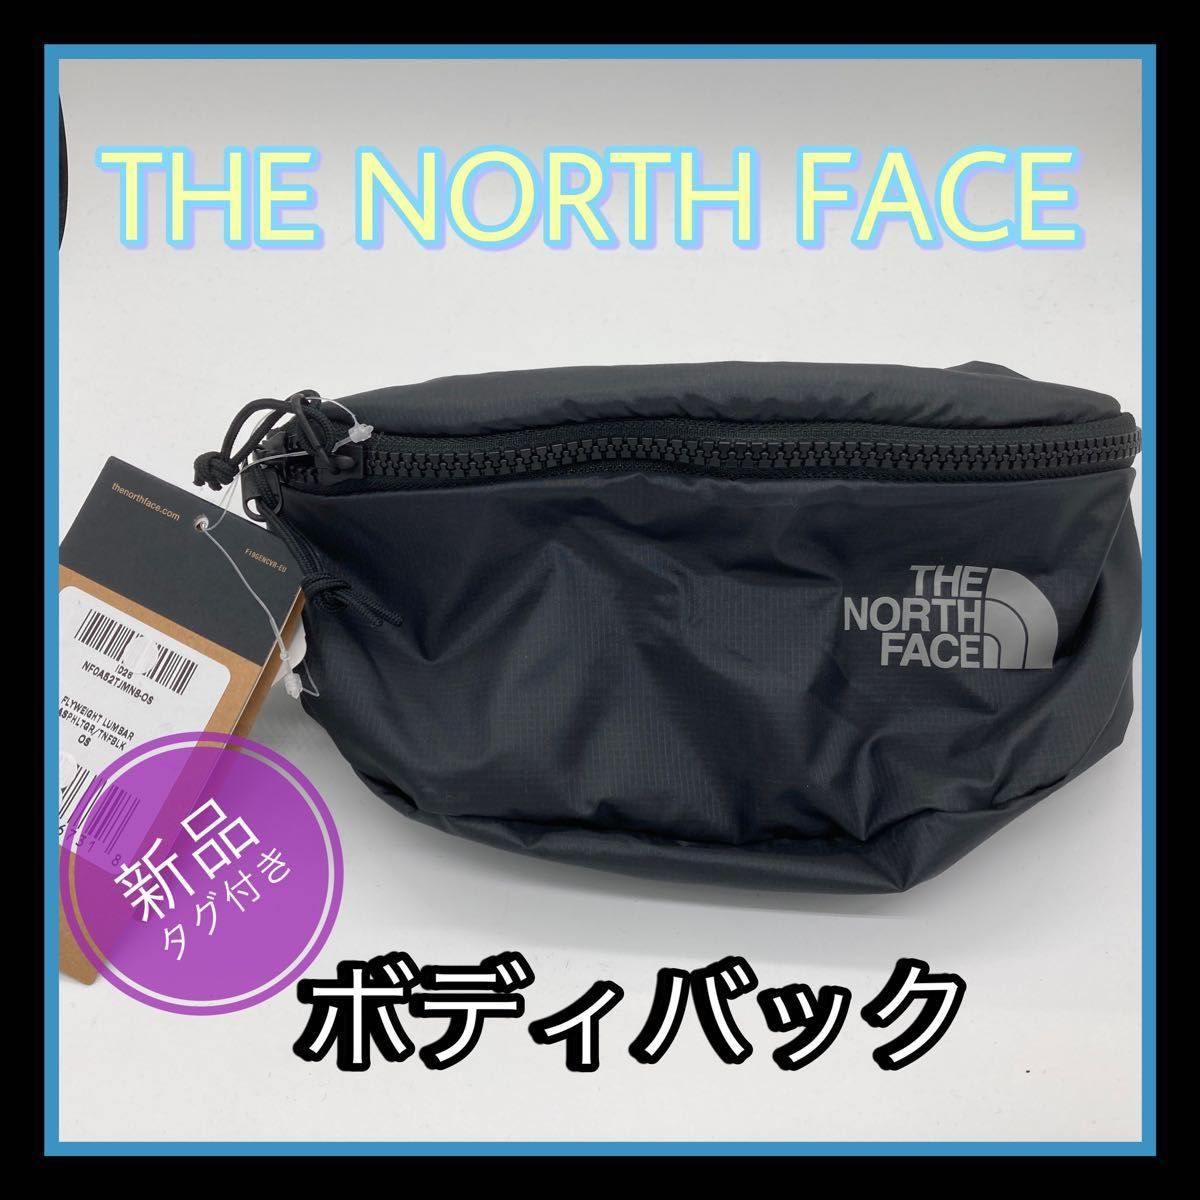 THE NORTH FACE ボディバッグ ウエストポーチ  NF0A52TJ ブラック